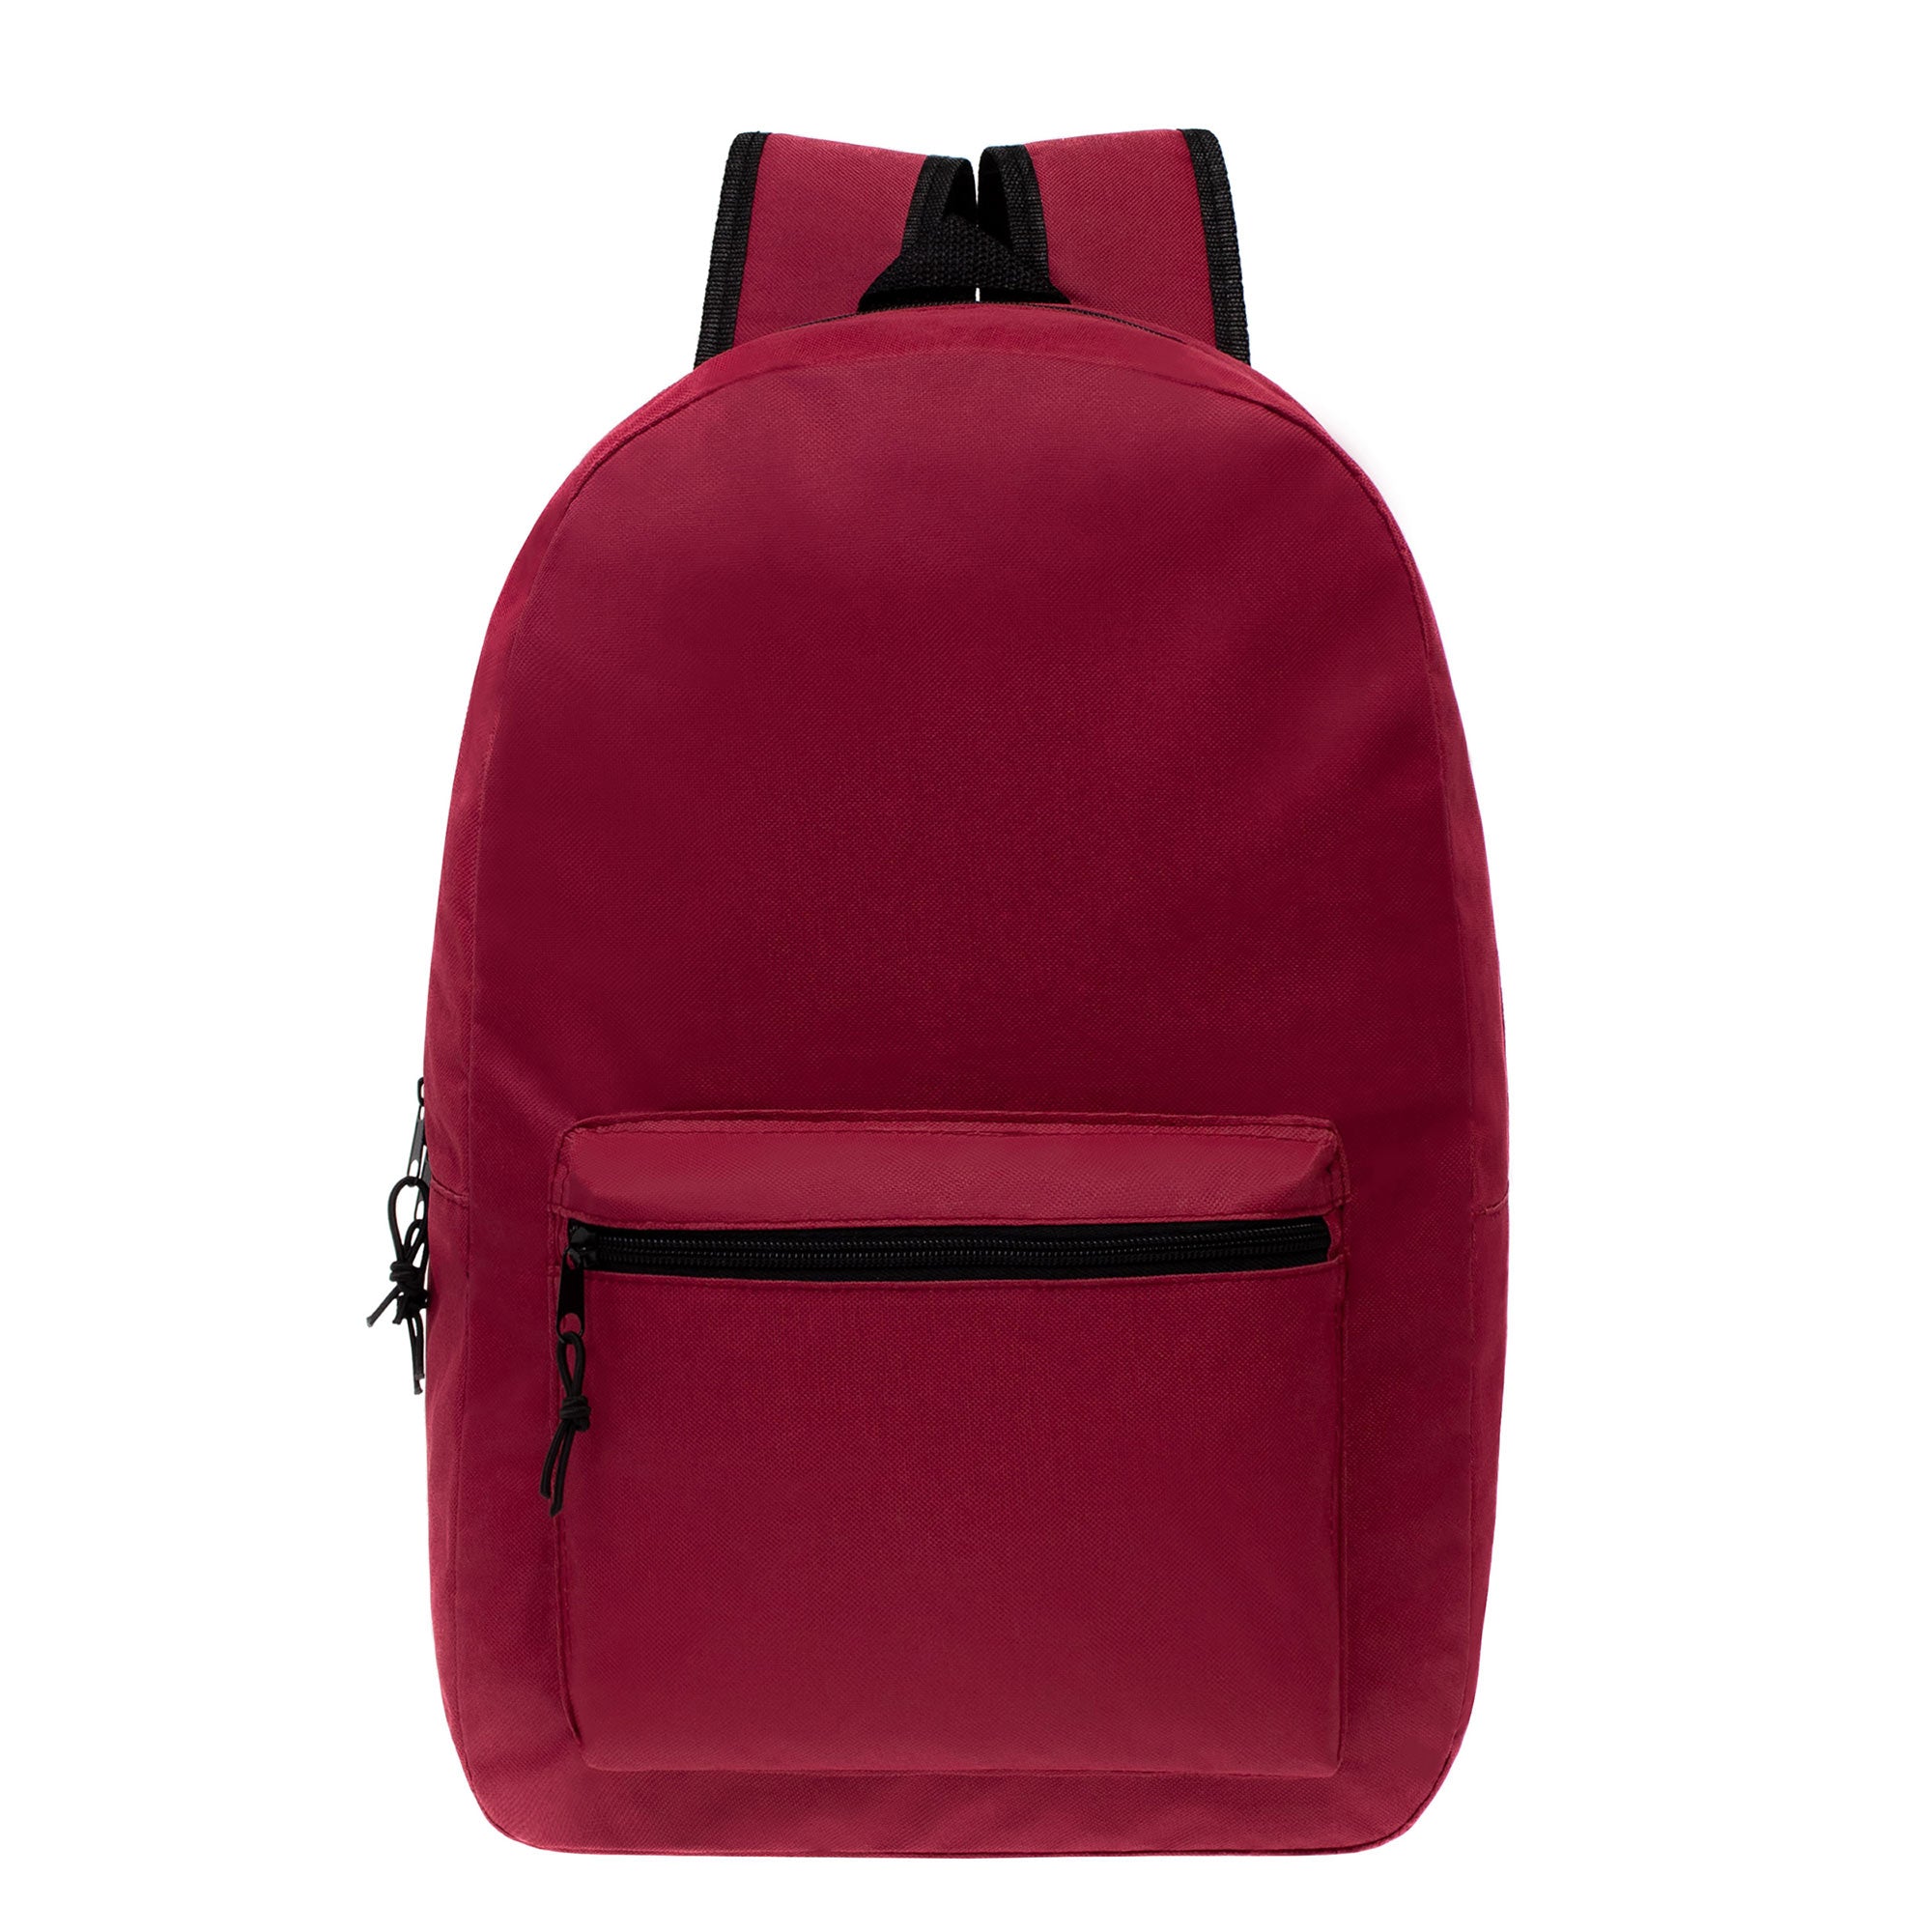 24 pack of 19 inch wholesale backpacks